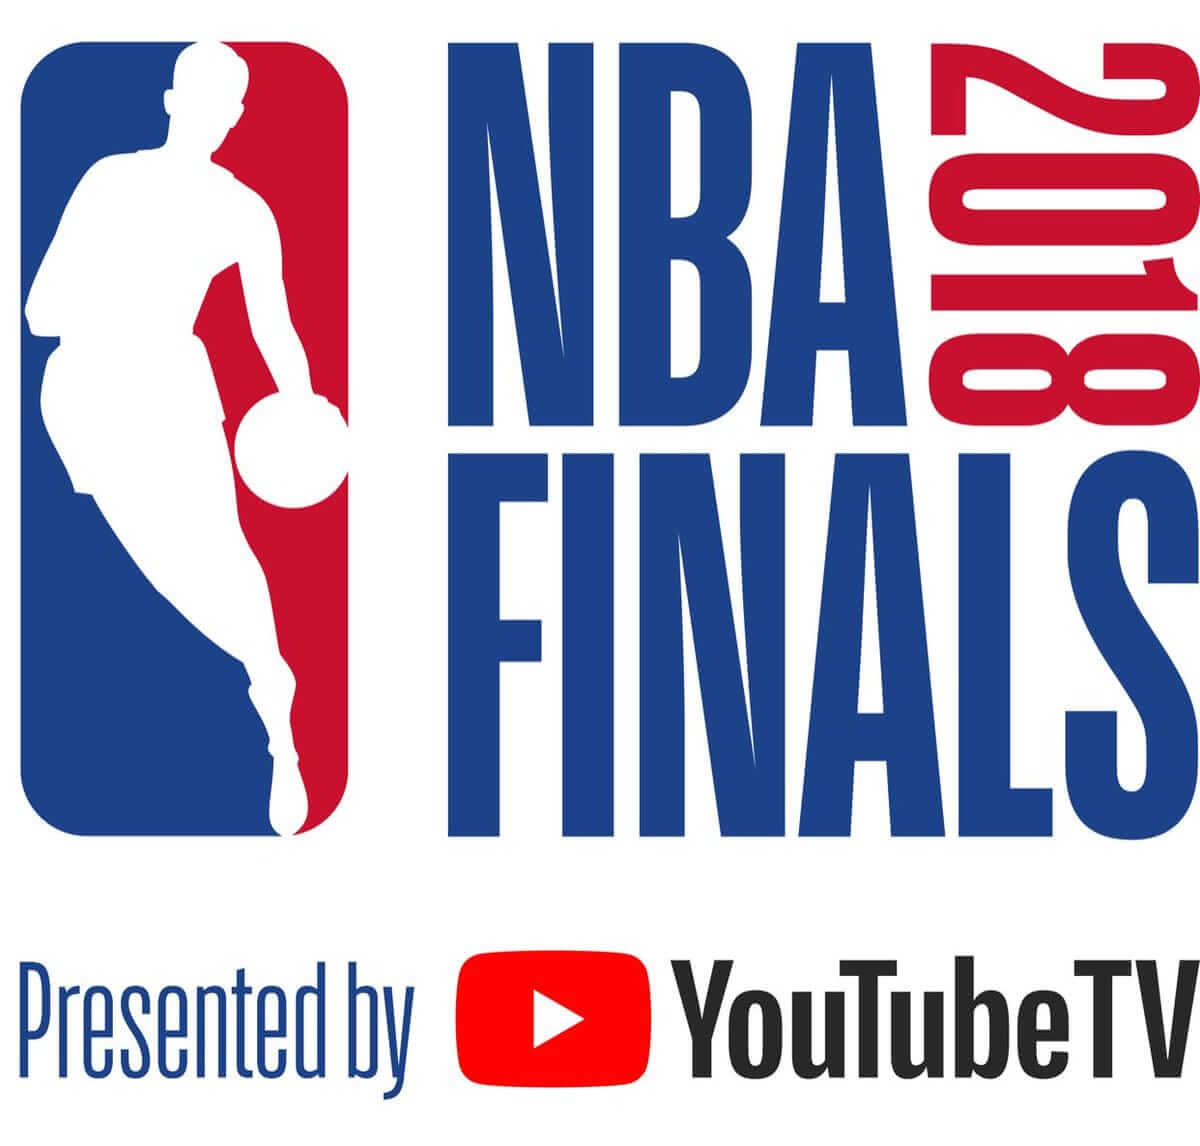 YouTube TV Logo to Appear on Court for NBA Finals Uni Watch